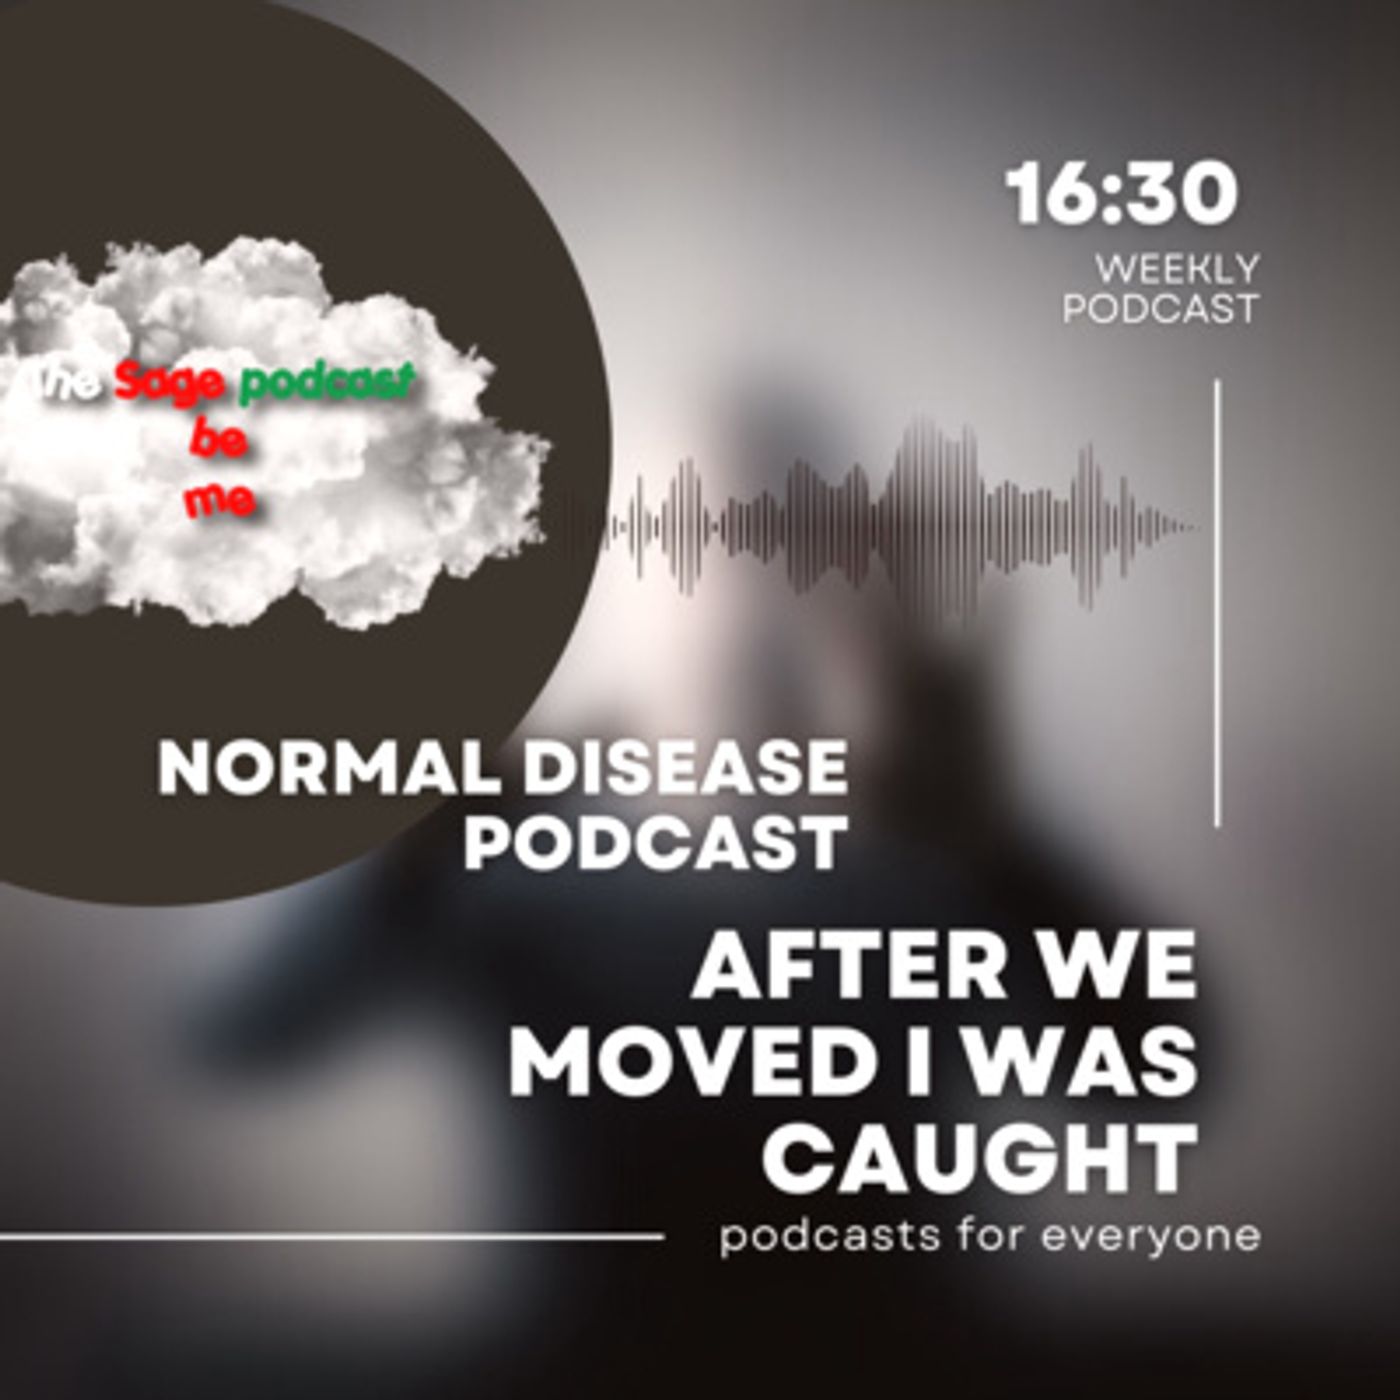 02) After we moved I was caught 😢😣😭Normal disease podcast!